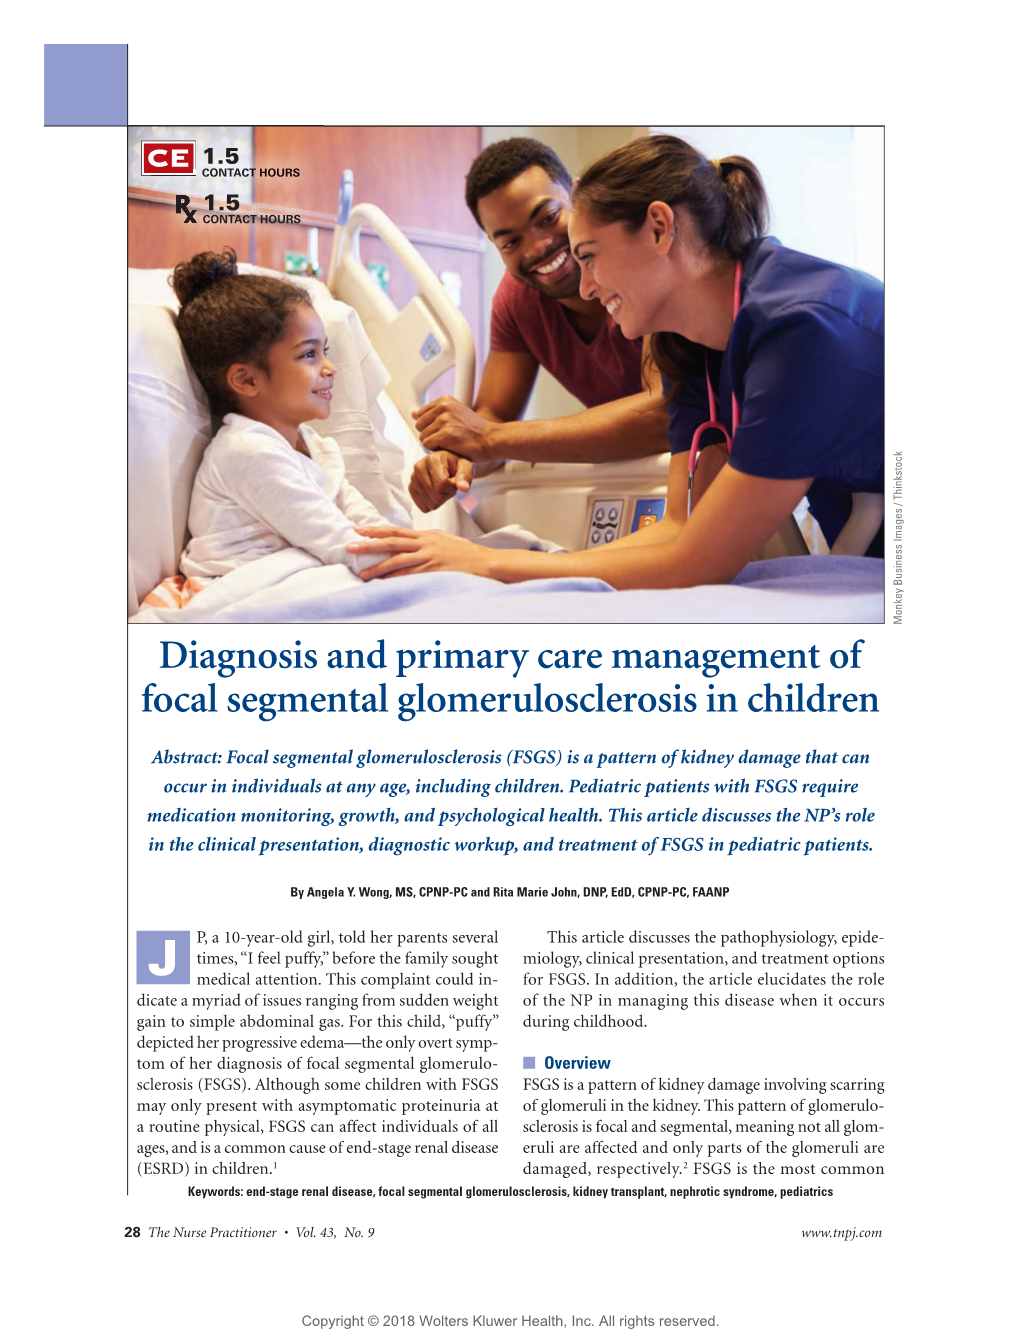 Diagnosis and Primary Care Management of Focal Segmental Glomerulosclerosis in Children